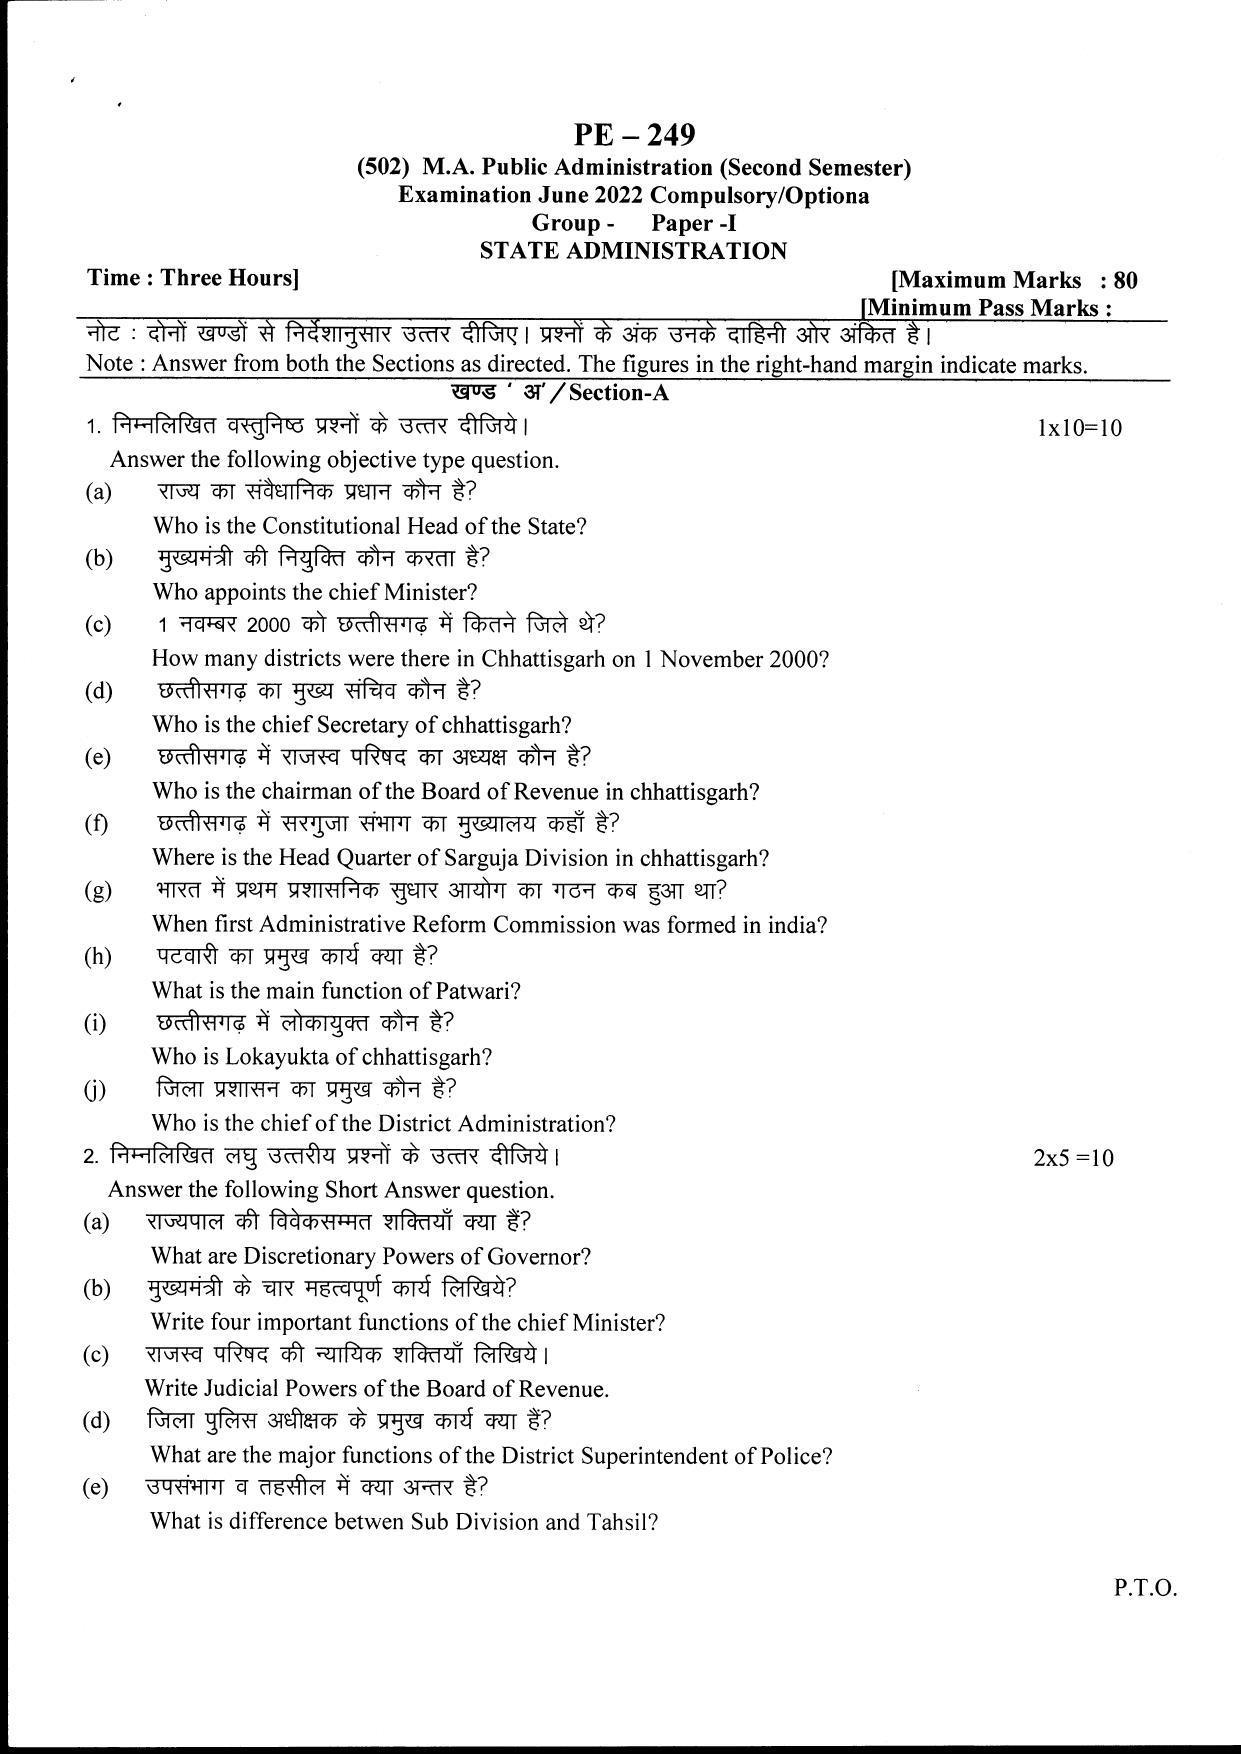  Bilaspur University Question Paper June 2022:M.A. Public Administration (Second Semester)State Administration Paper 1 - Page 1